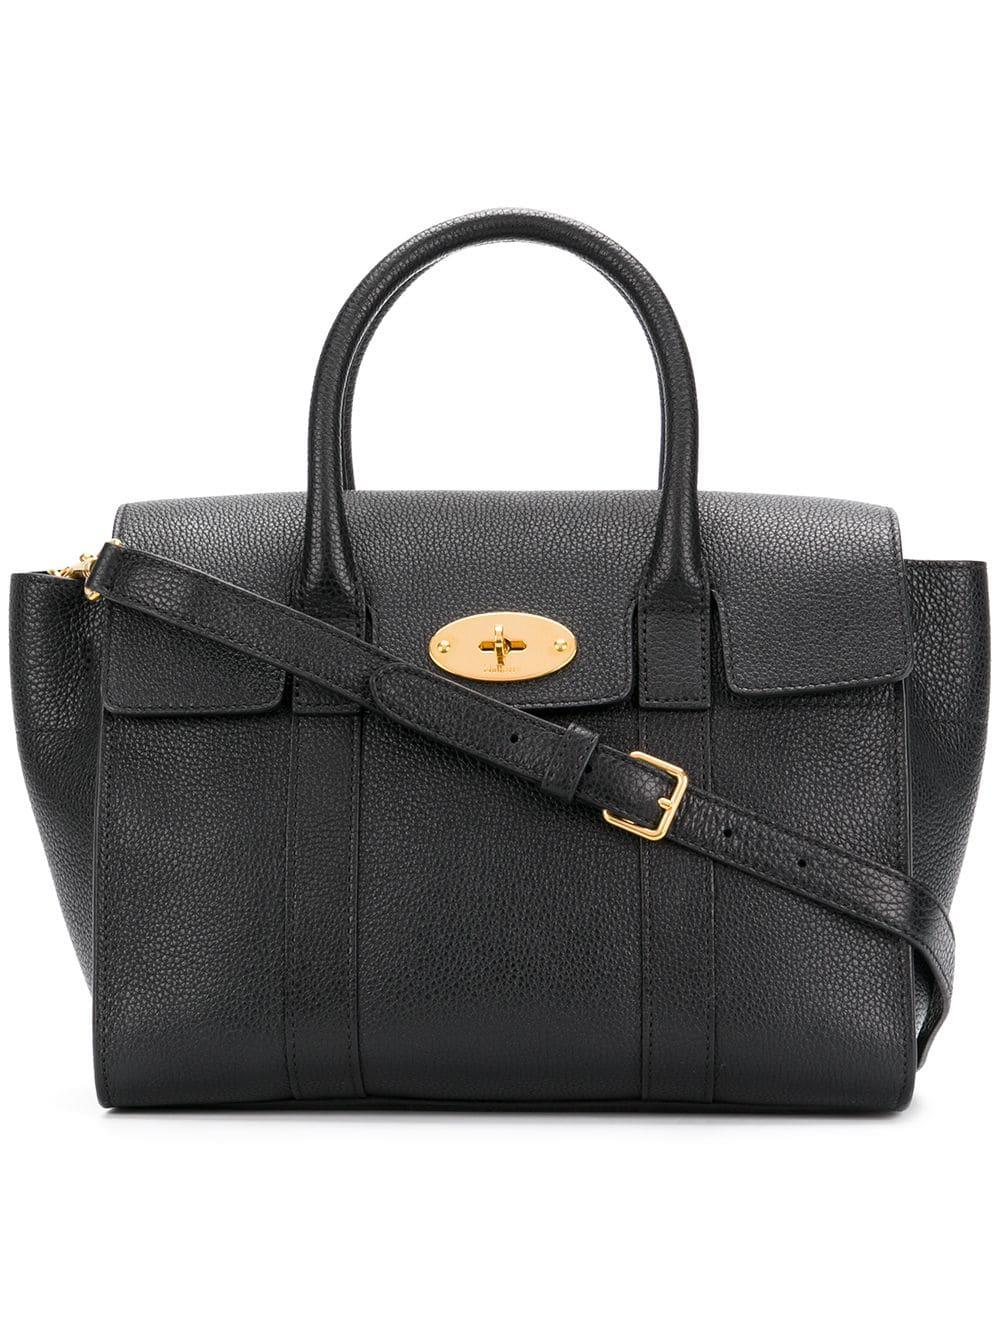 Mulberry Bayswater Small Leather Tote in Black - Lyst